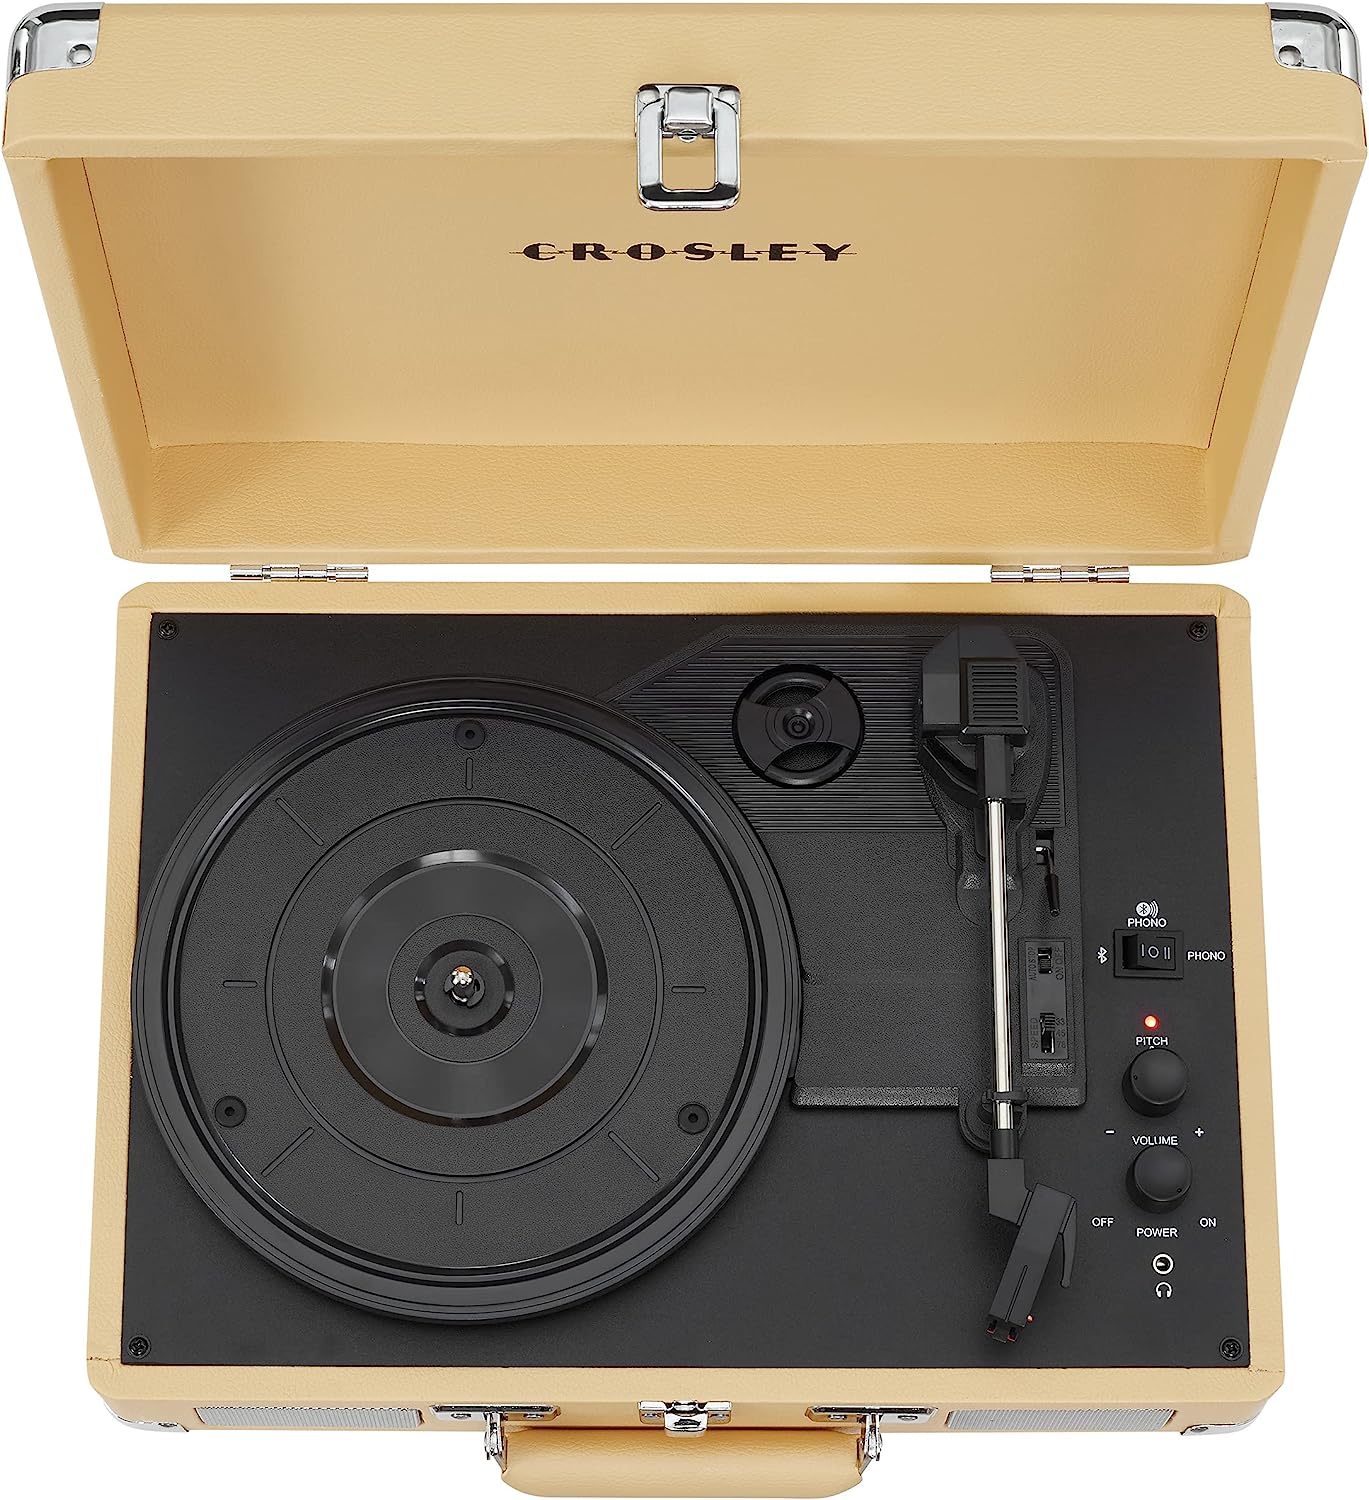 Crosley CR8005F-MT Cruiser Plus Vintage 3-Speed Bluetooth in/Out Suitcase Vinyl Report Player Turntable, Mint